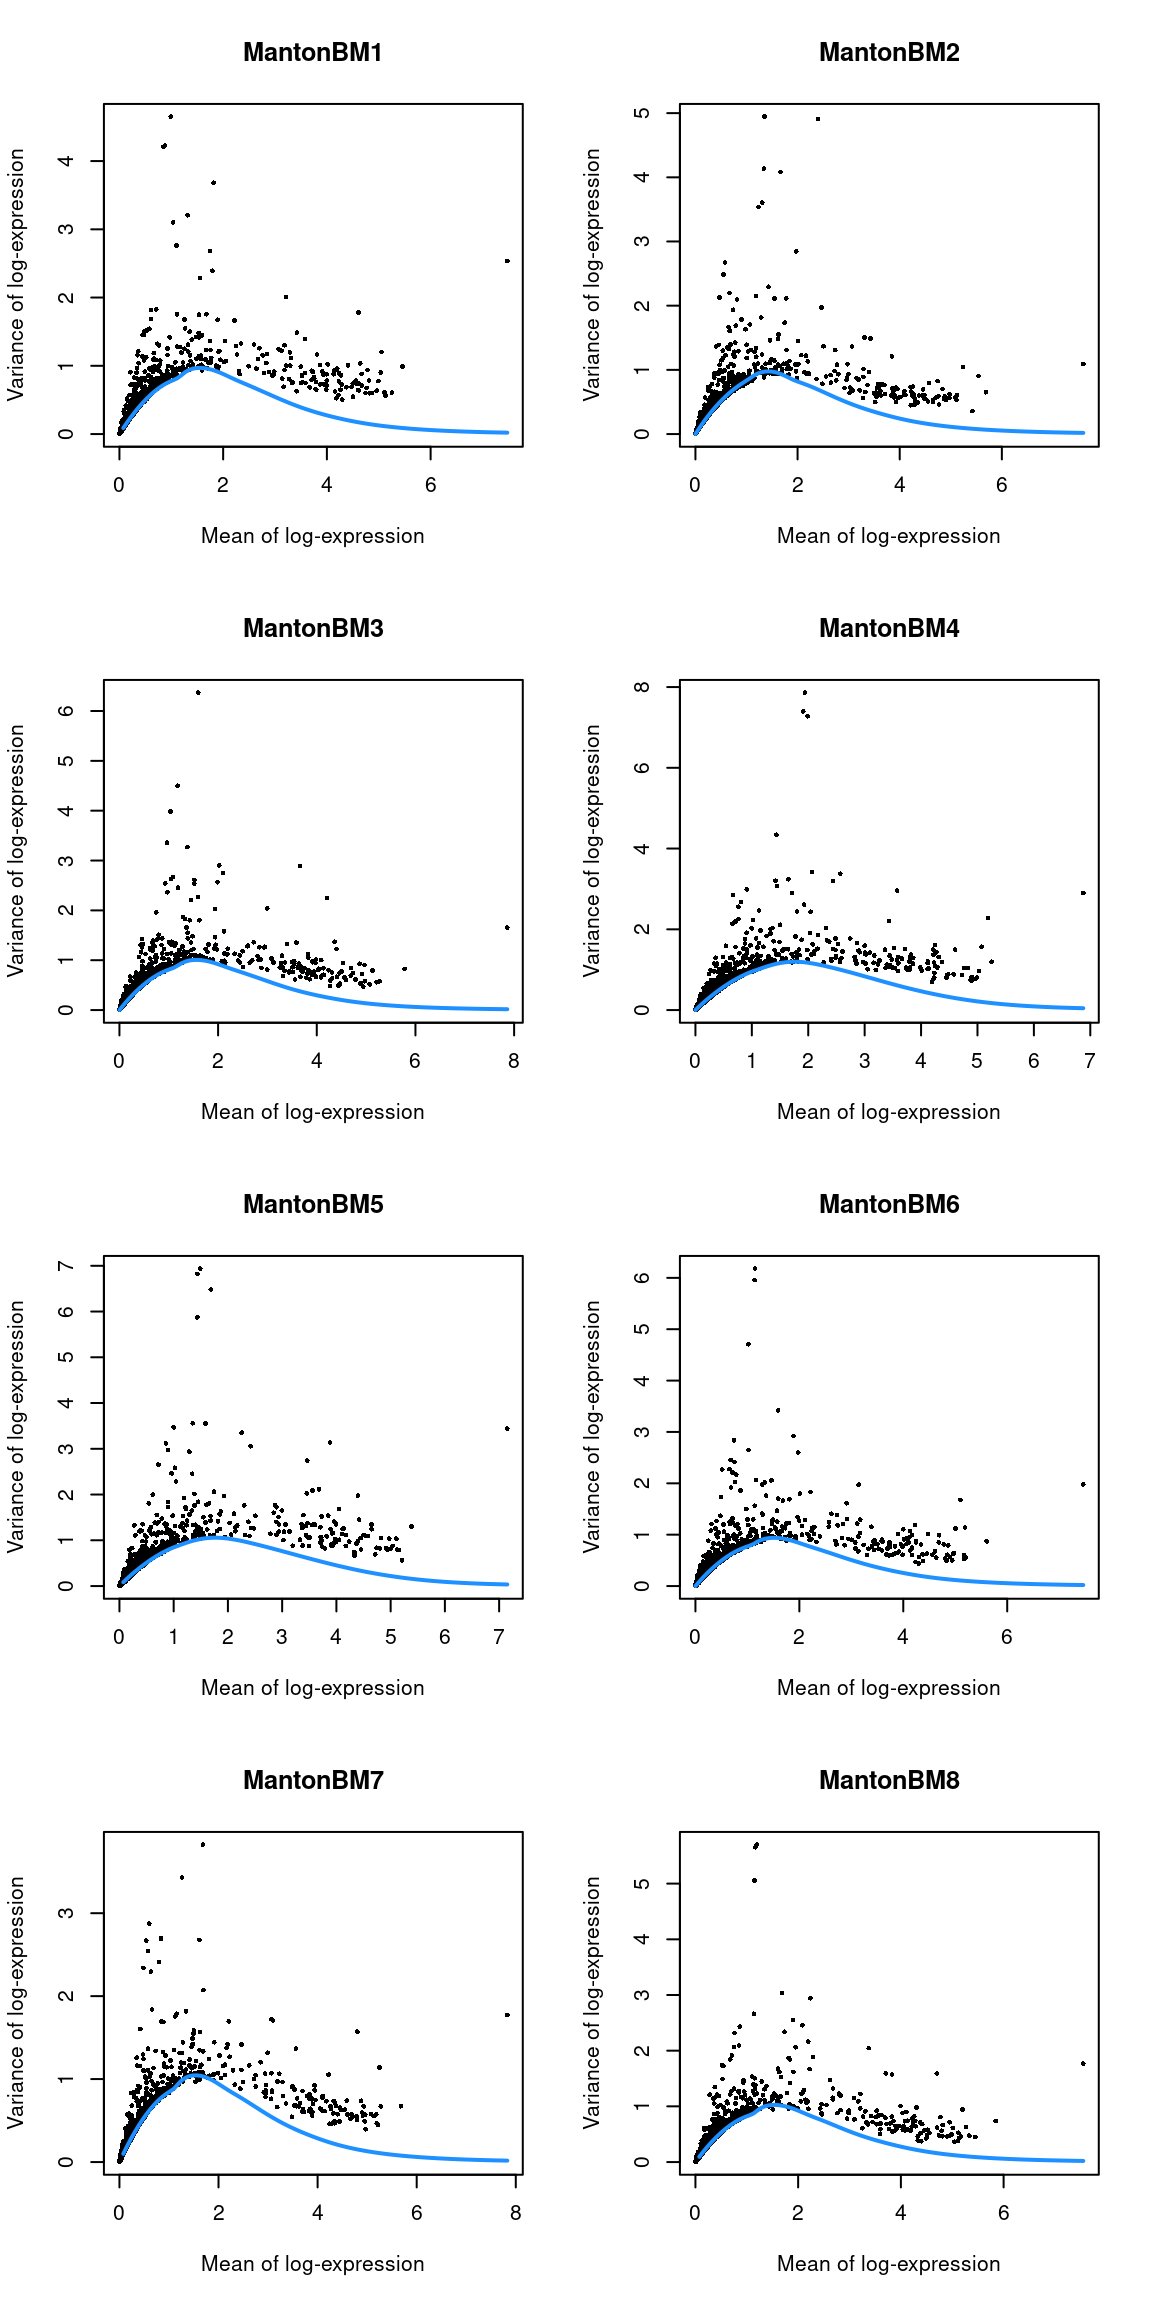 Per-gene variance as a function of the mean for the log-expression values in the HCA bone marrow dataset. Each point represents a gene (black) with the mean-variance trend (blue) fitted to the variances.